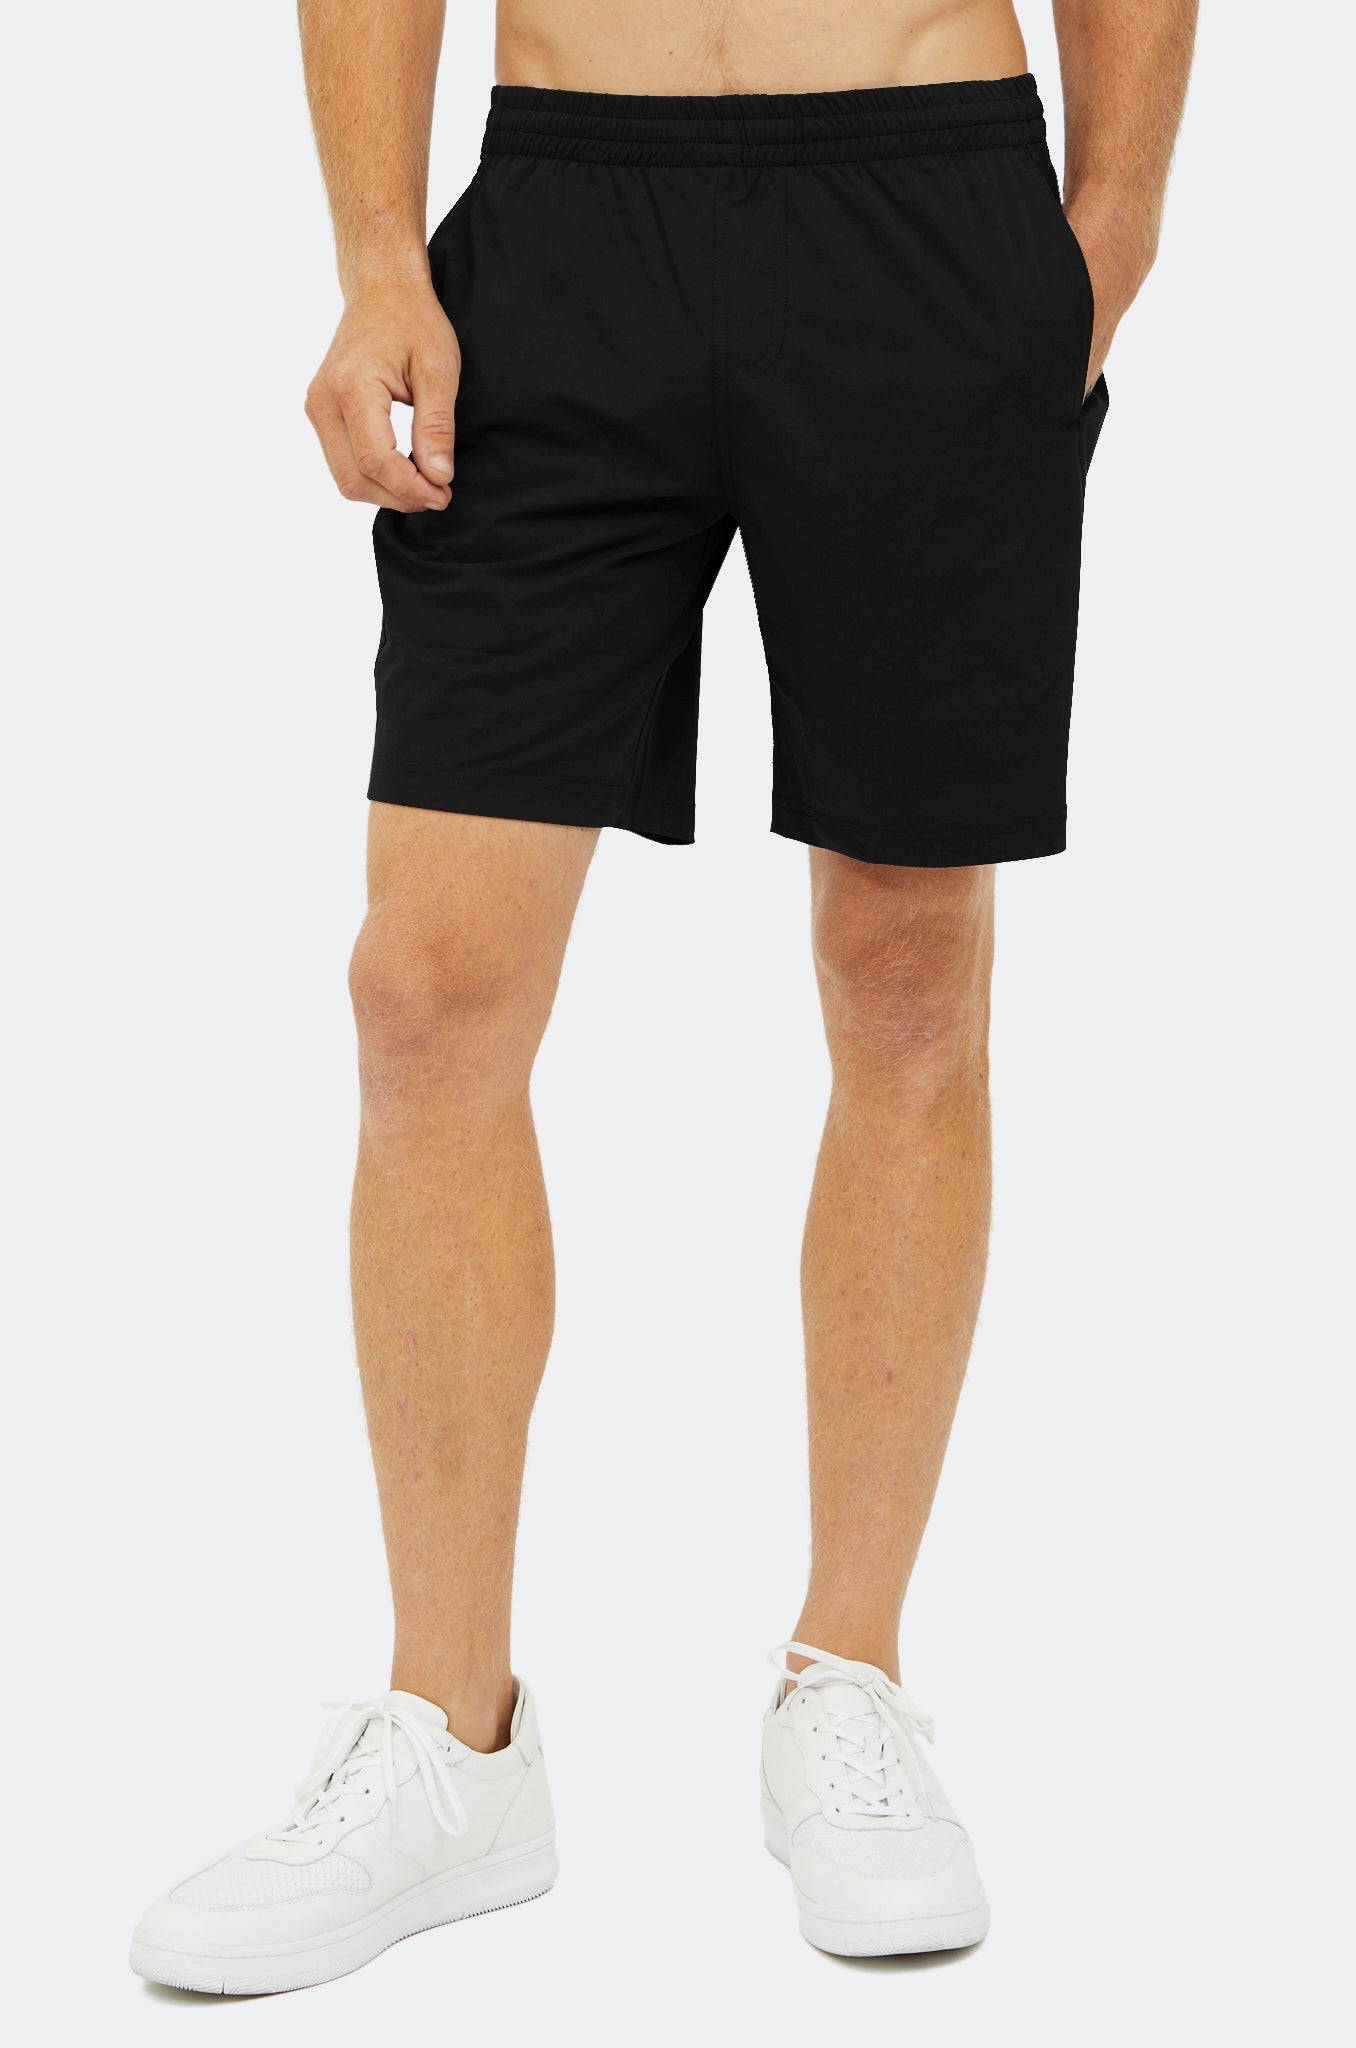 Image of the byron tennis short in tuxedo